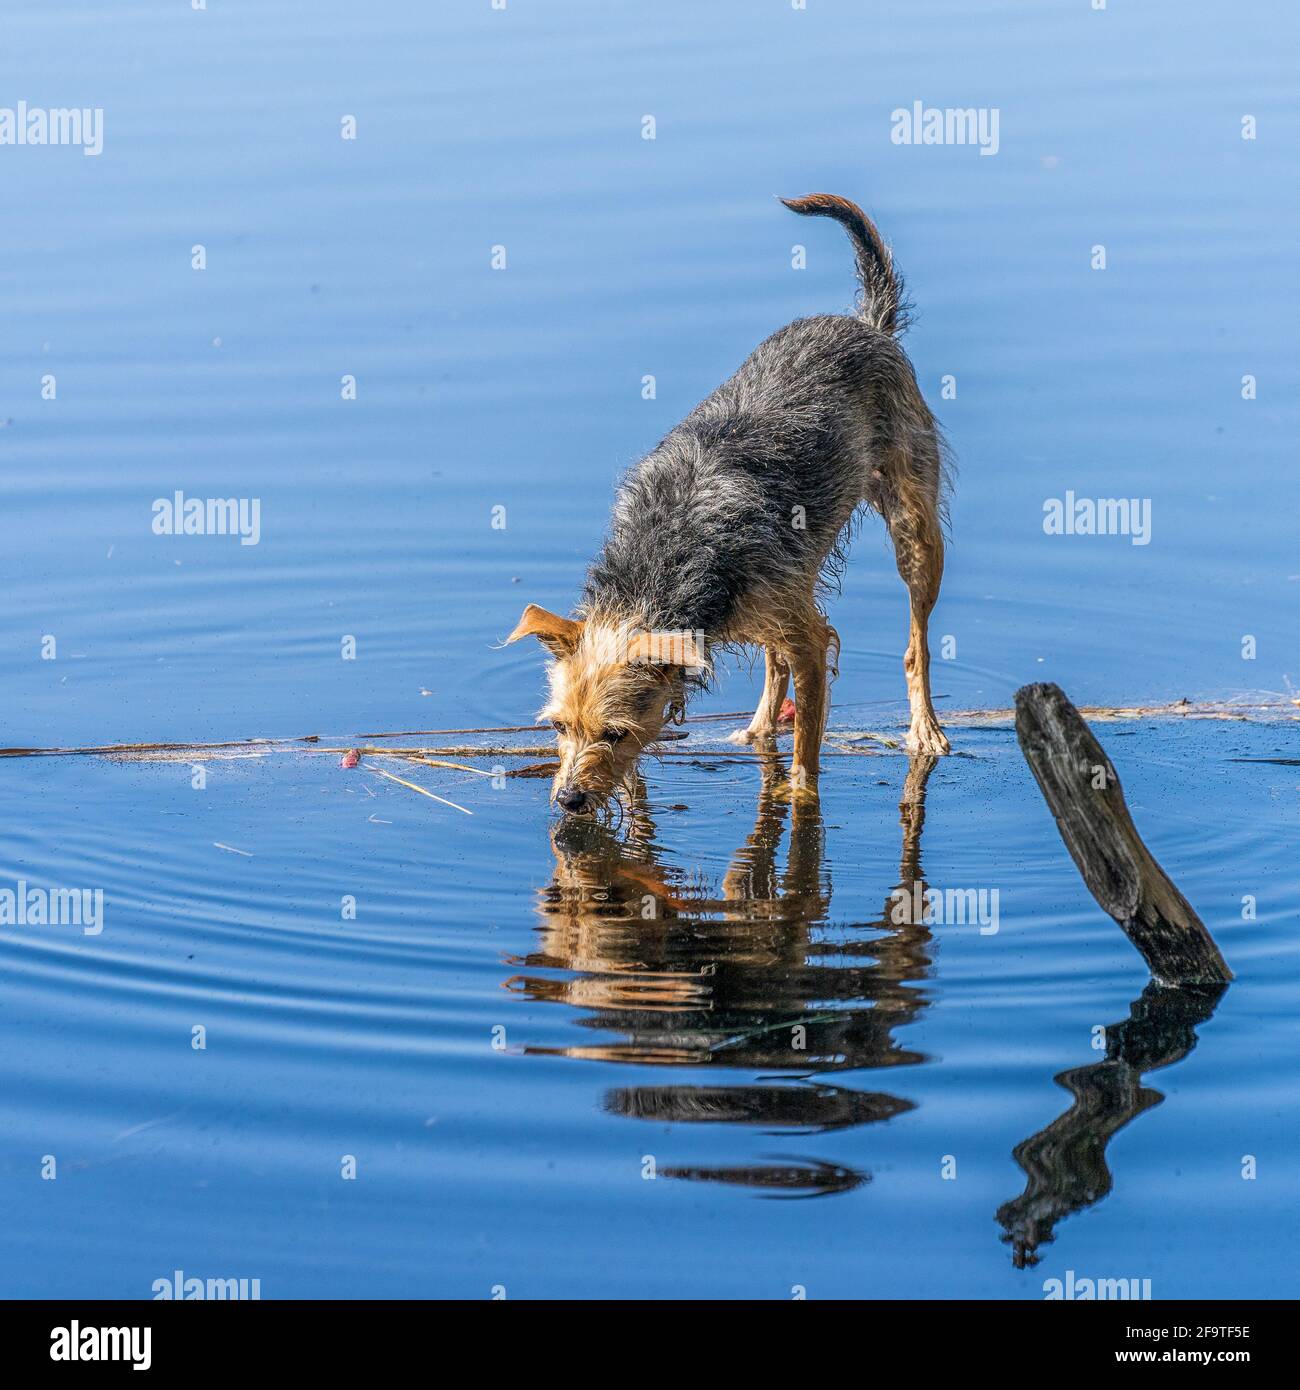 Page 2 - Haustier High Resolution Stock Photography and Images - Alamy